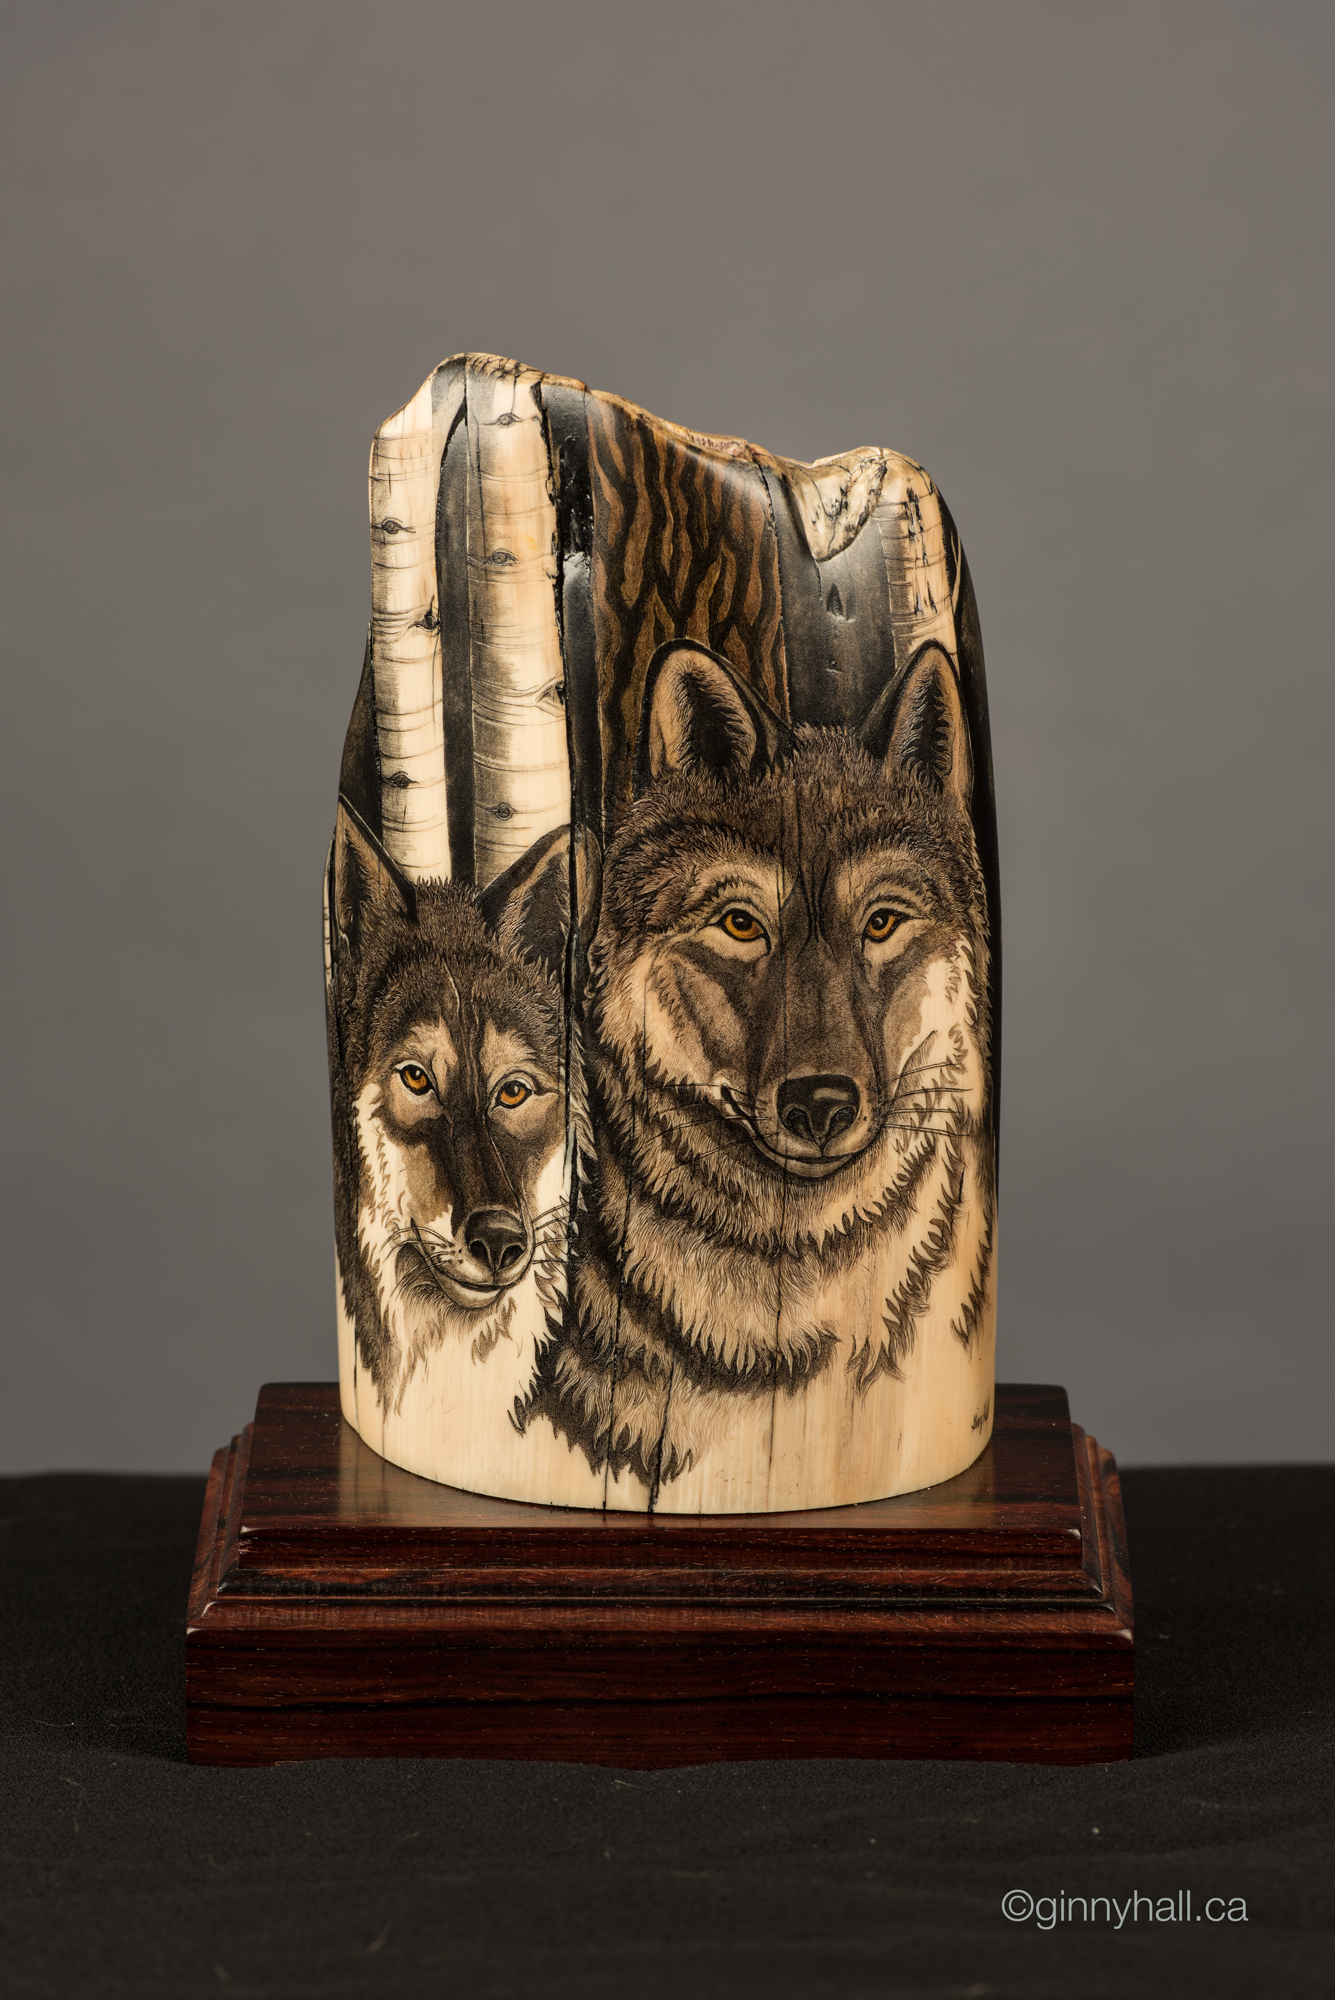 A scrimshaw peice by Ginny Hall depicting two wolf faces.